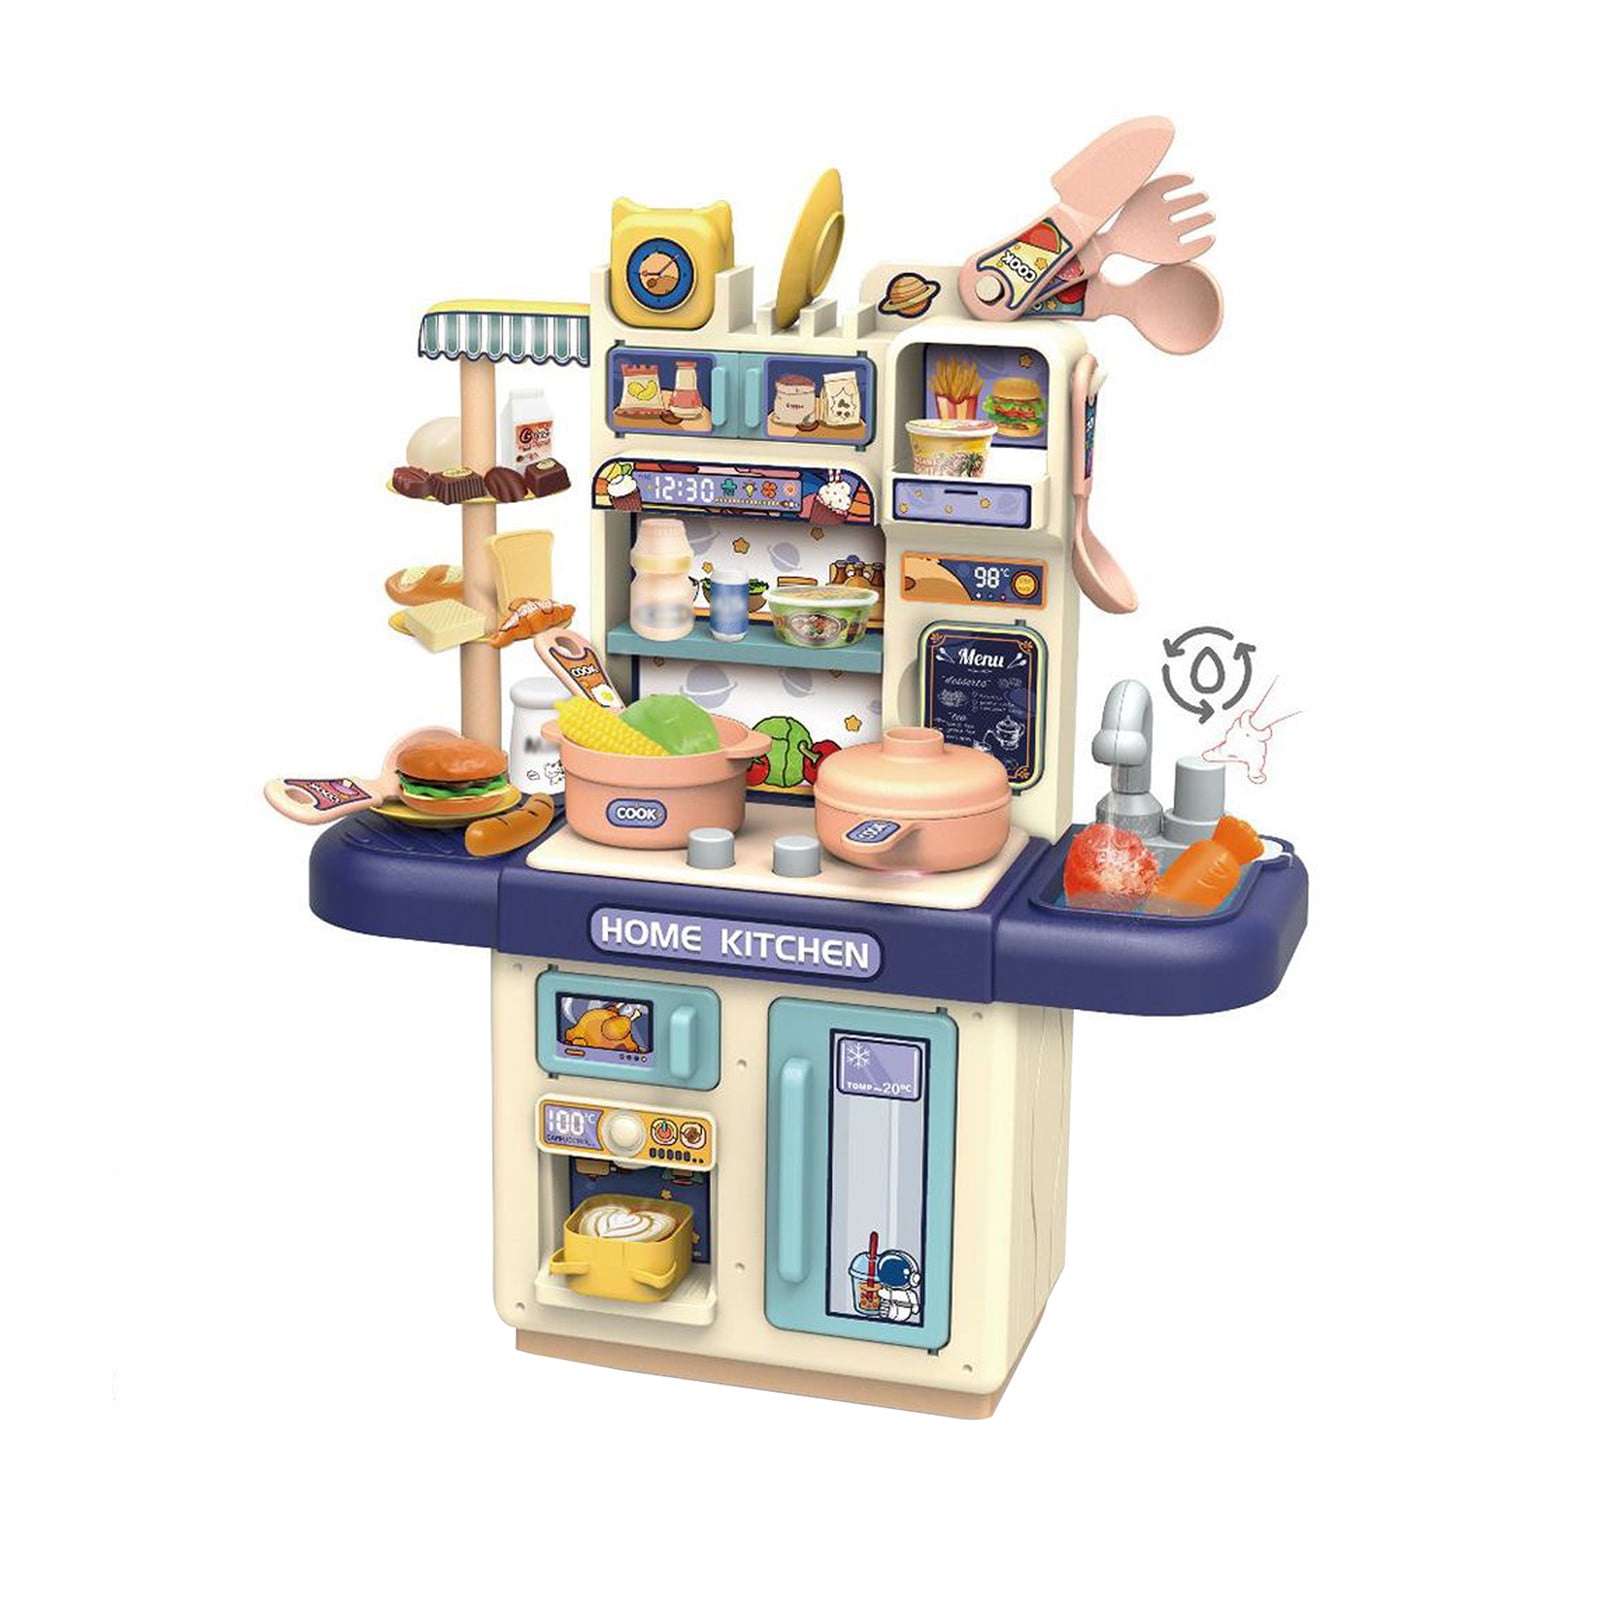 Link Little Chef Mini Kitchen Playset with Sound and Color Changing Lights for Realistic Cooking